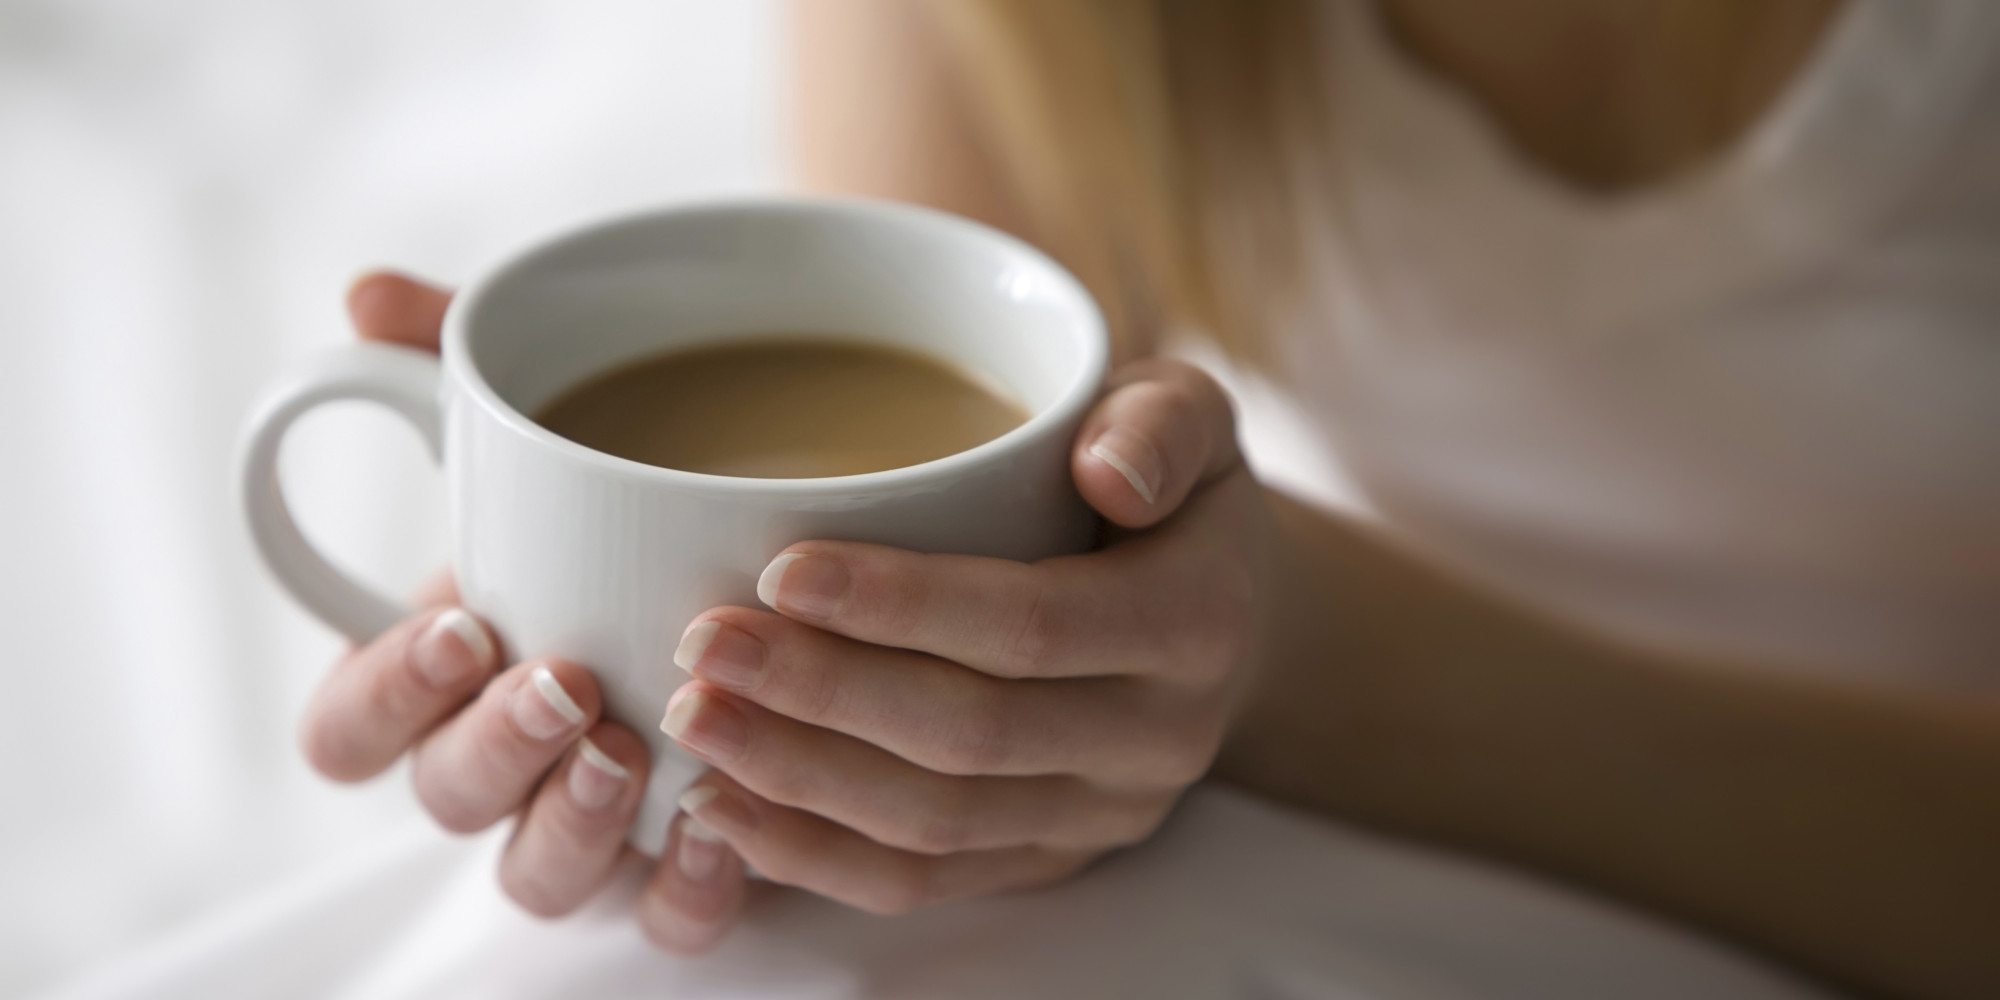 Coffee Lovers Rejoice! Health Benefits From Your Morning Cup of Joe